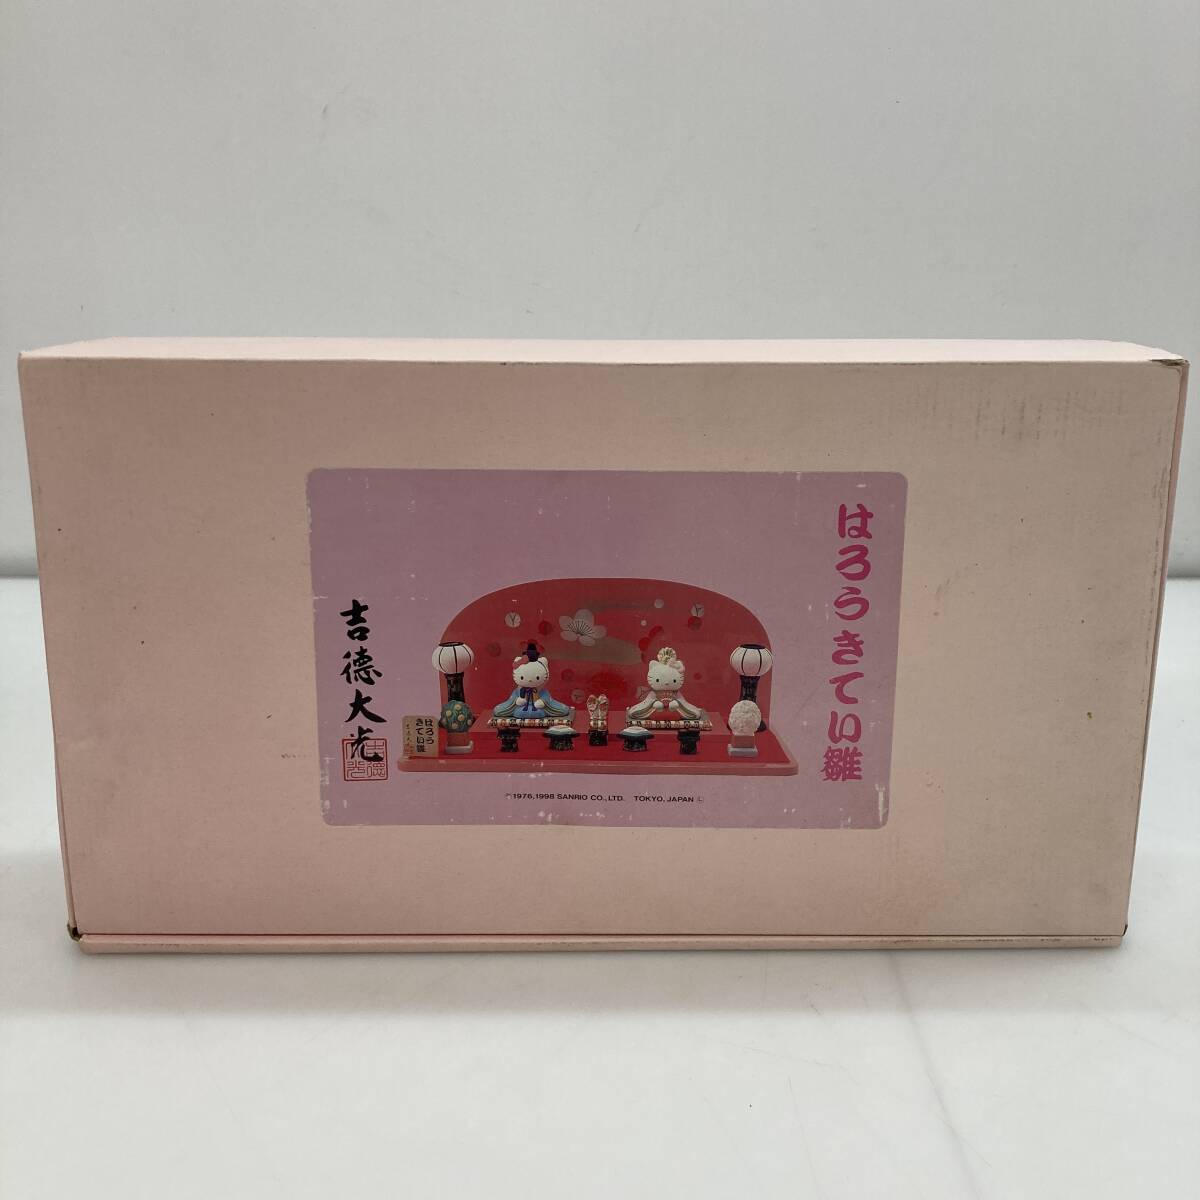 No.5242 *1 jpy ~ [ soft toy set 2 box including in a package ] Sanrio Hello Kitty s one 2000 year limitation 25 anniversary premium doll doll hinaningyo other junk 